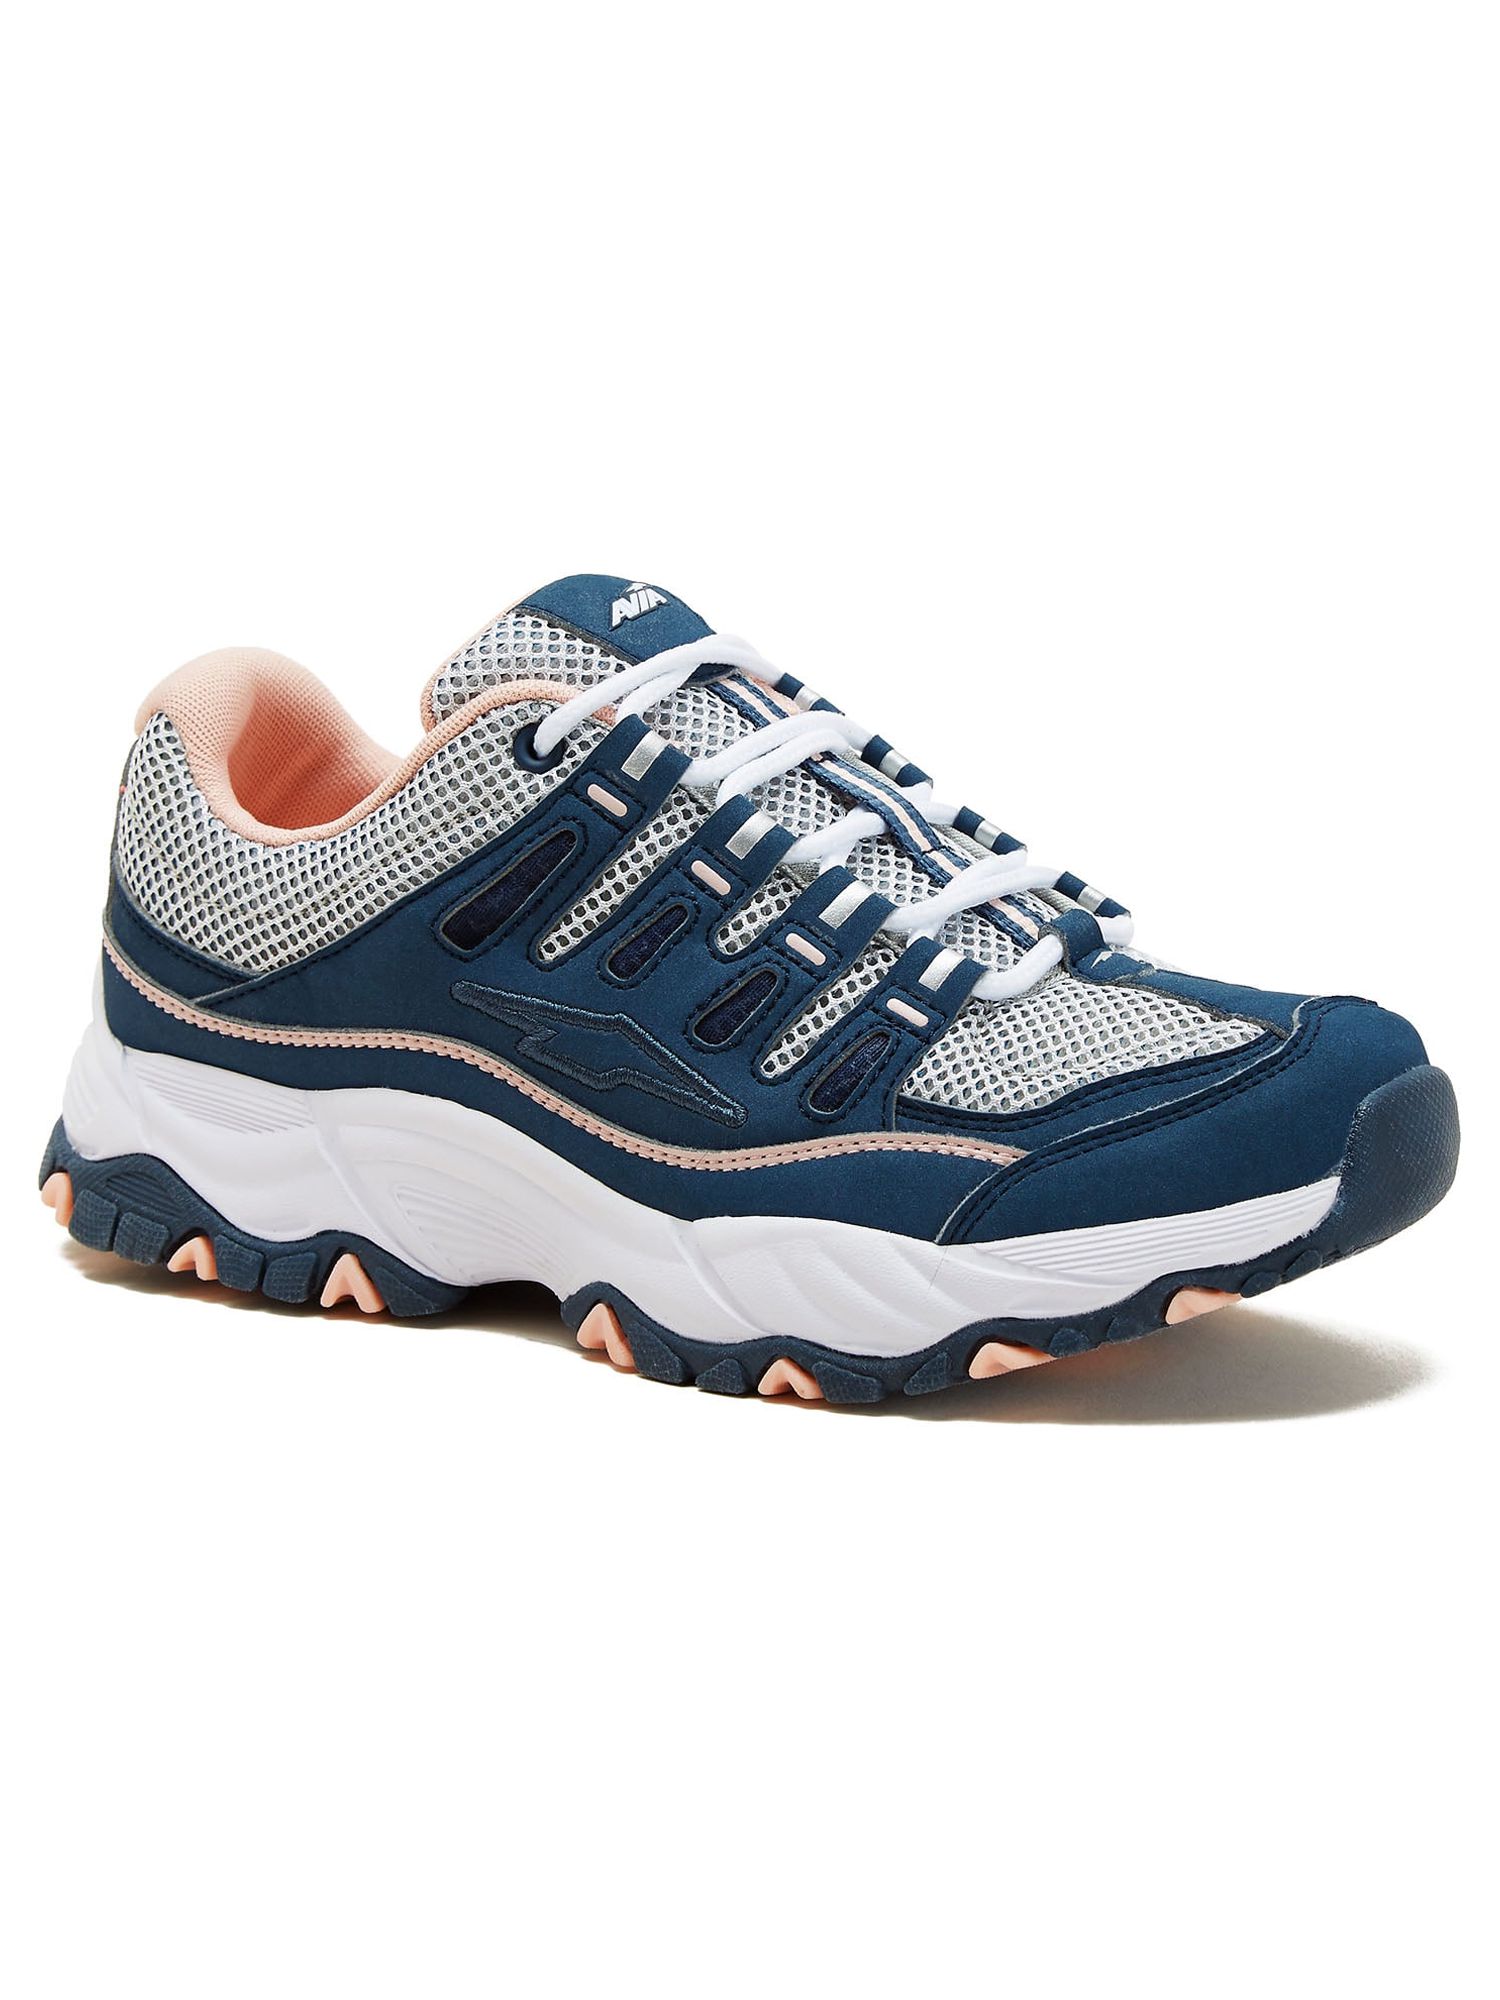 Avia Women's Elevate Athletic Sneakers, Wide Width Available - image 1 of 5